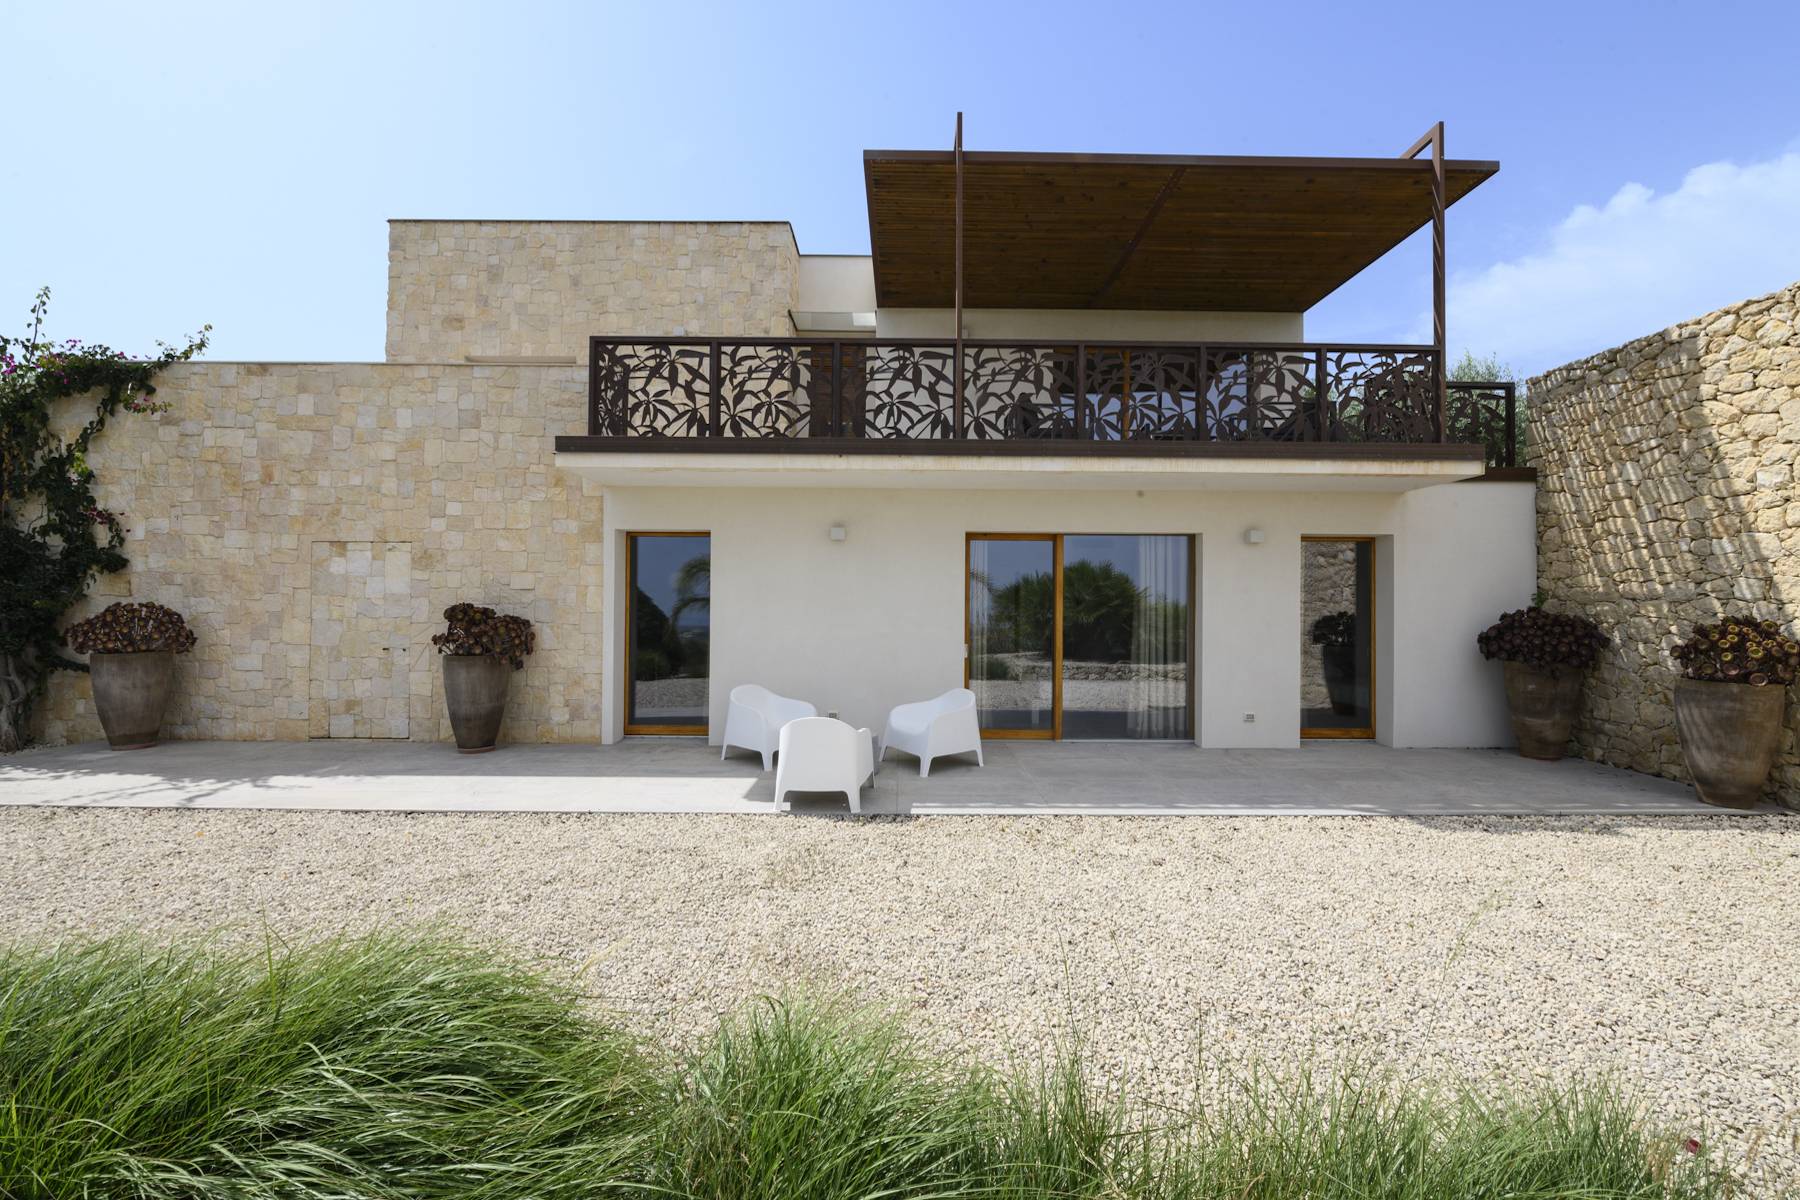 Luxury villa in Avola's countryside with sea view